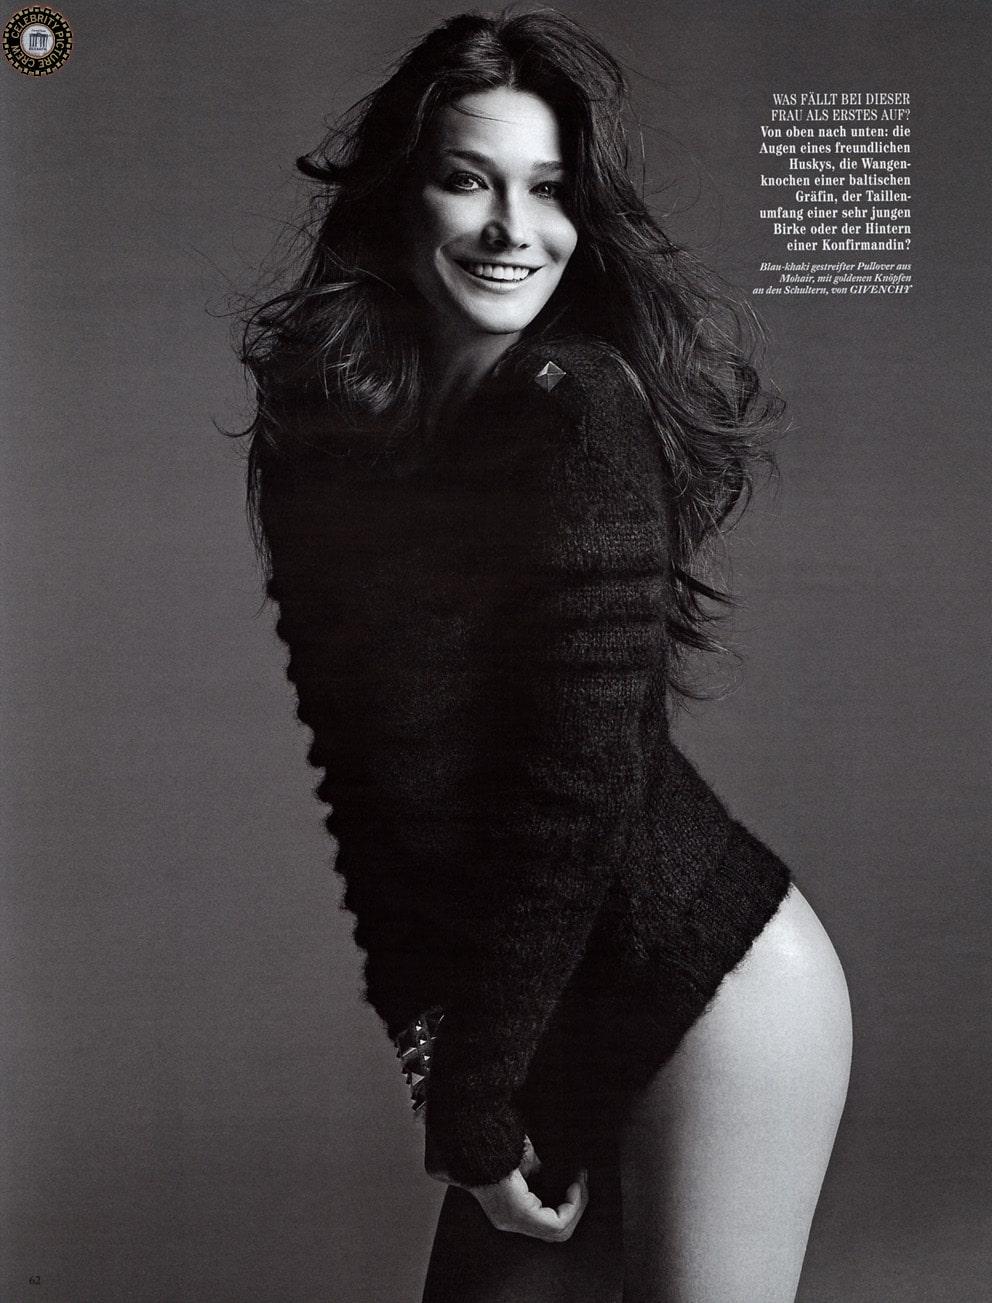 Hot Picture Of Carla Bruni Which Are Sure To Win Your